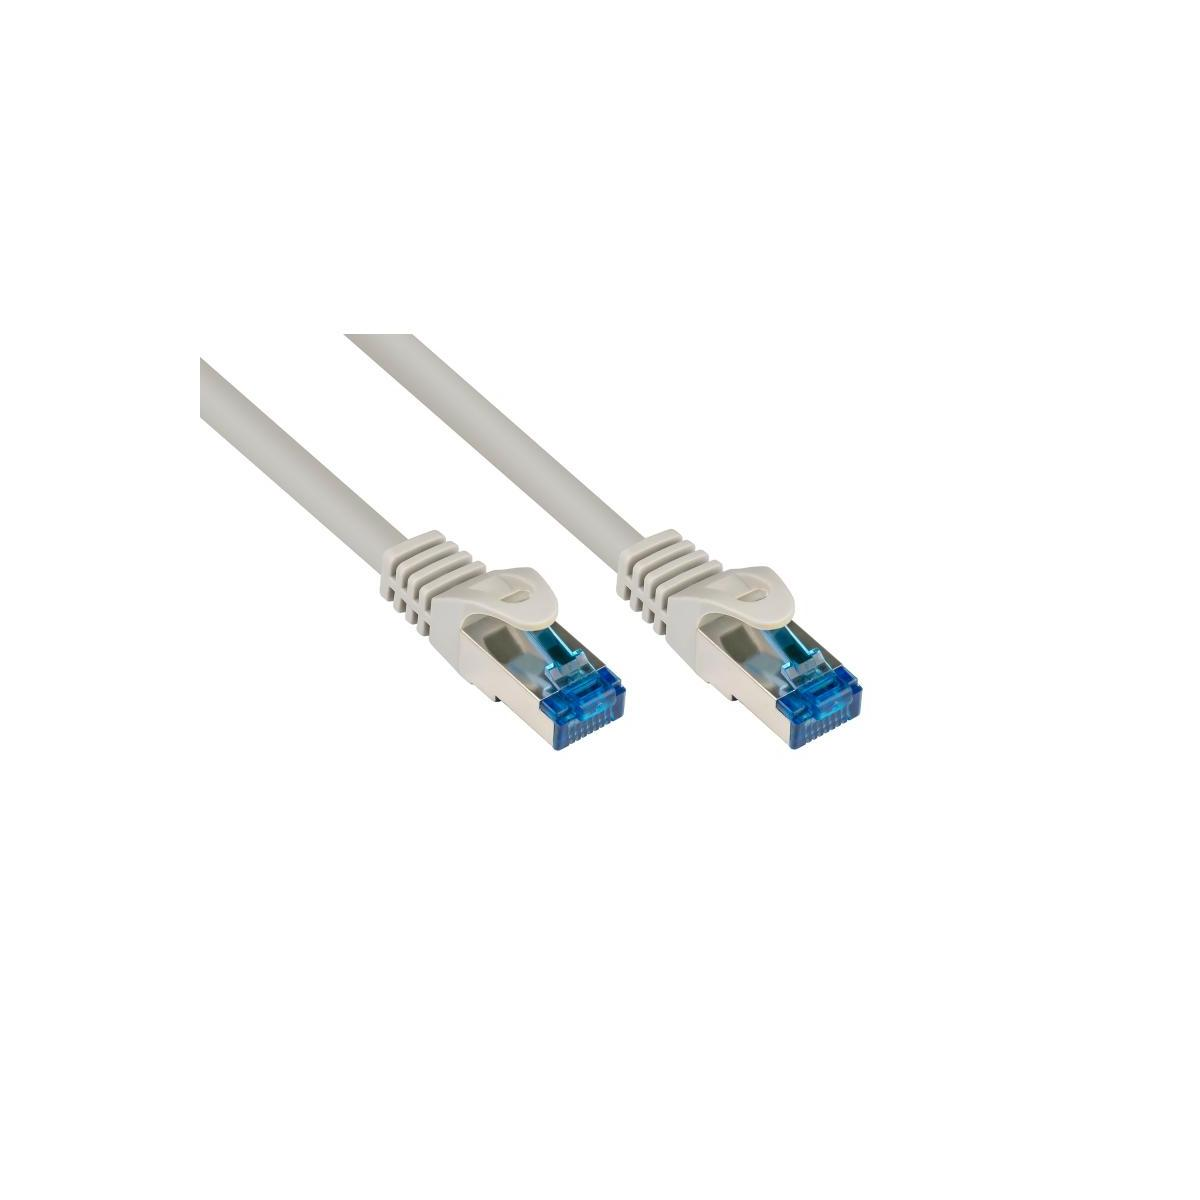 VARIA GROUP 8060-SF005 Patchcable Cat.6a, Grau